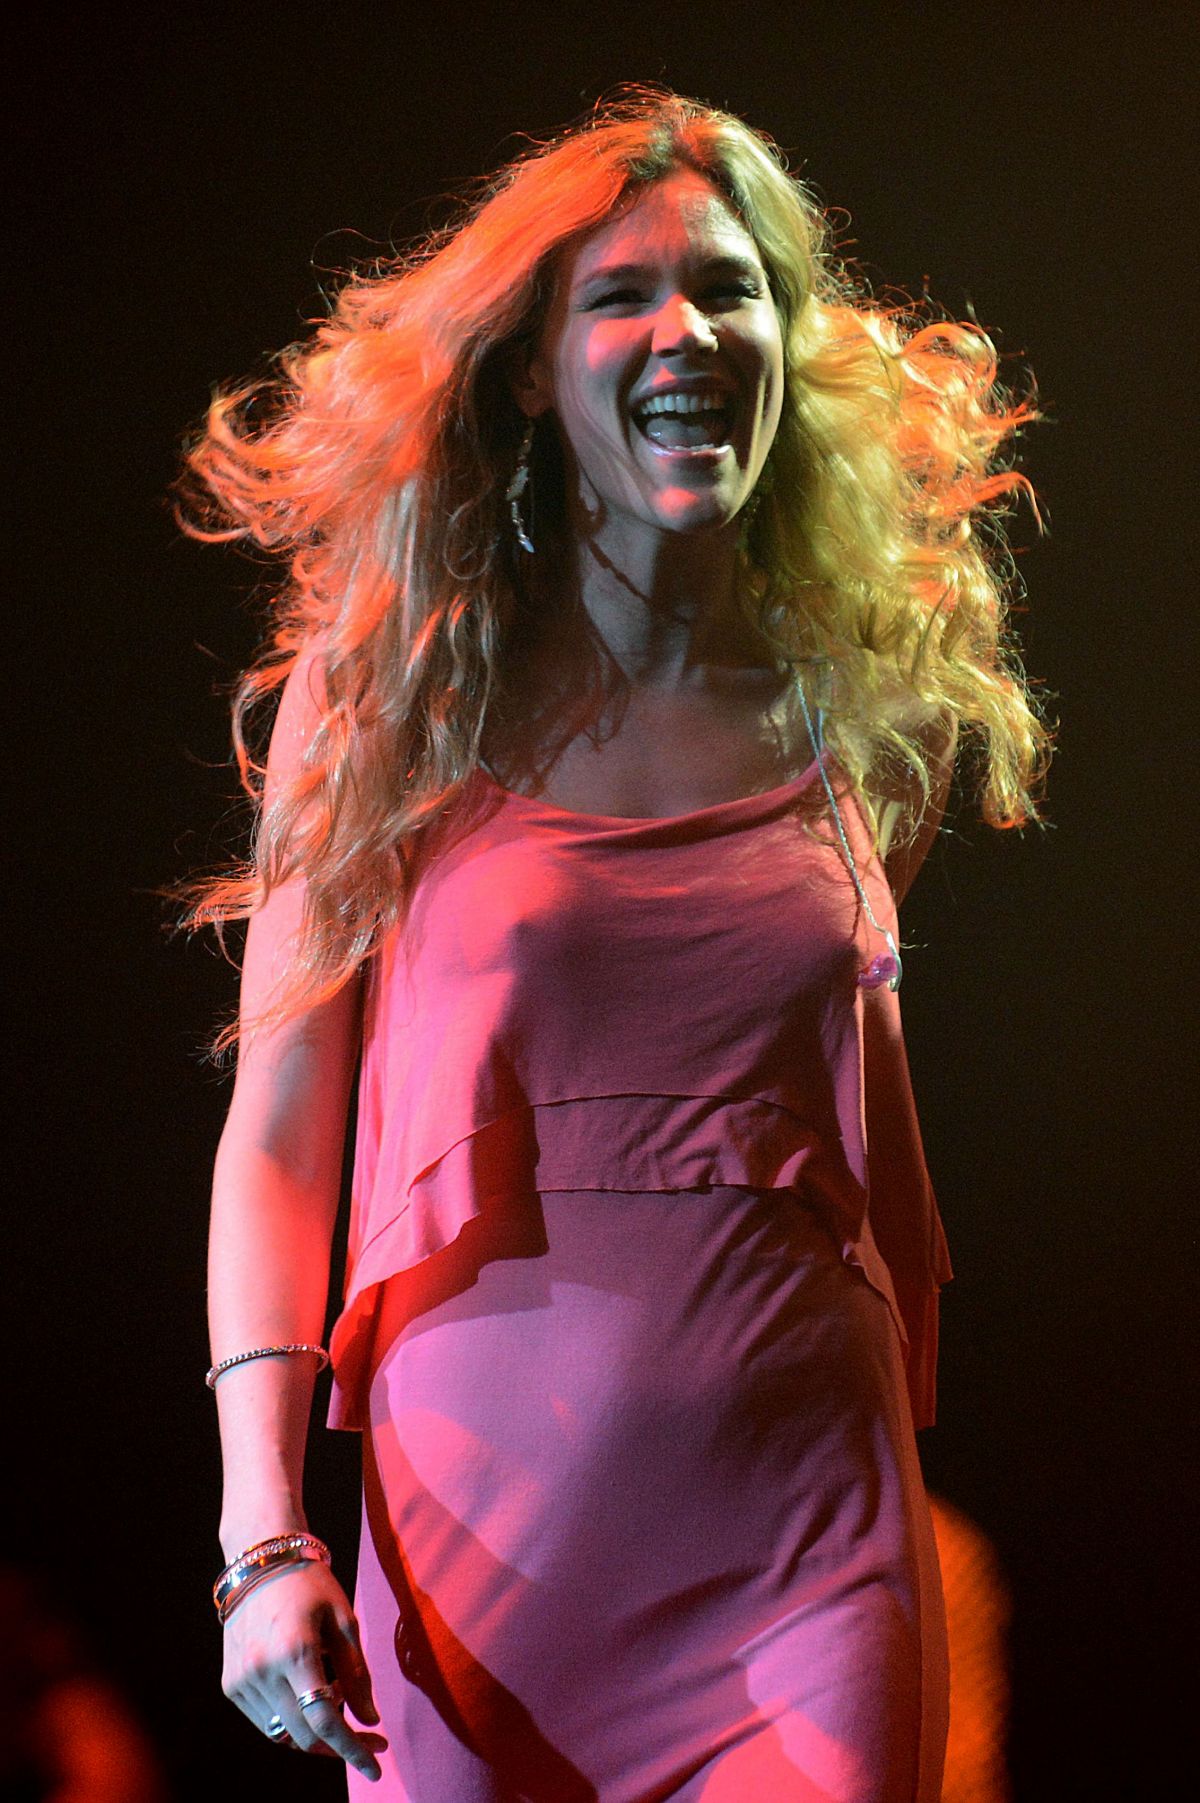 JOSS STONE Performs at a Concert in Johannesburg.